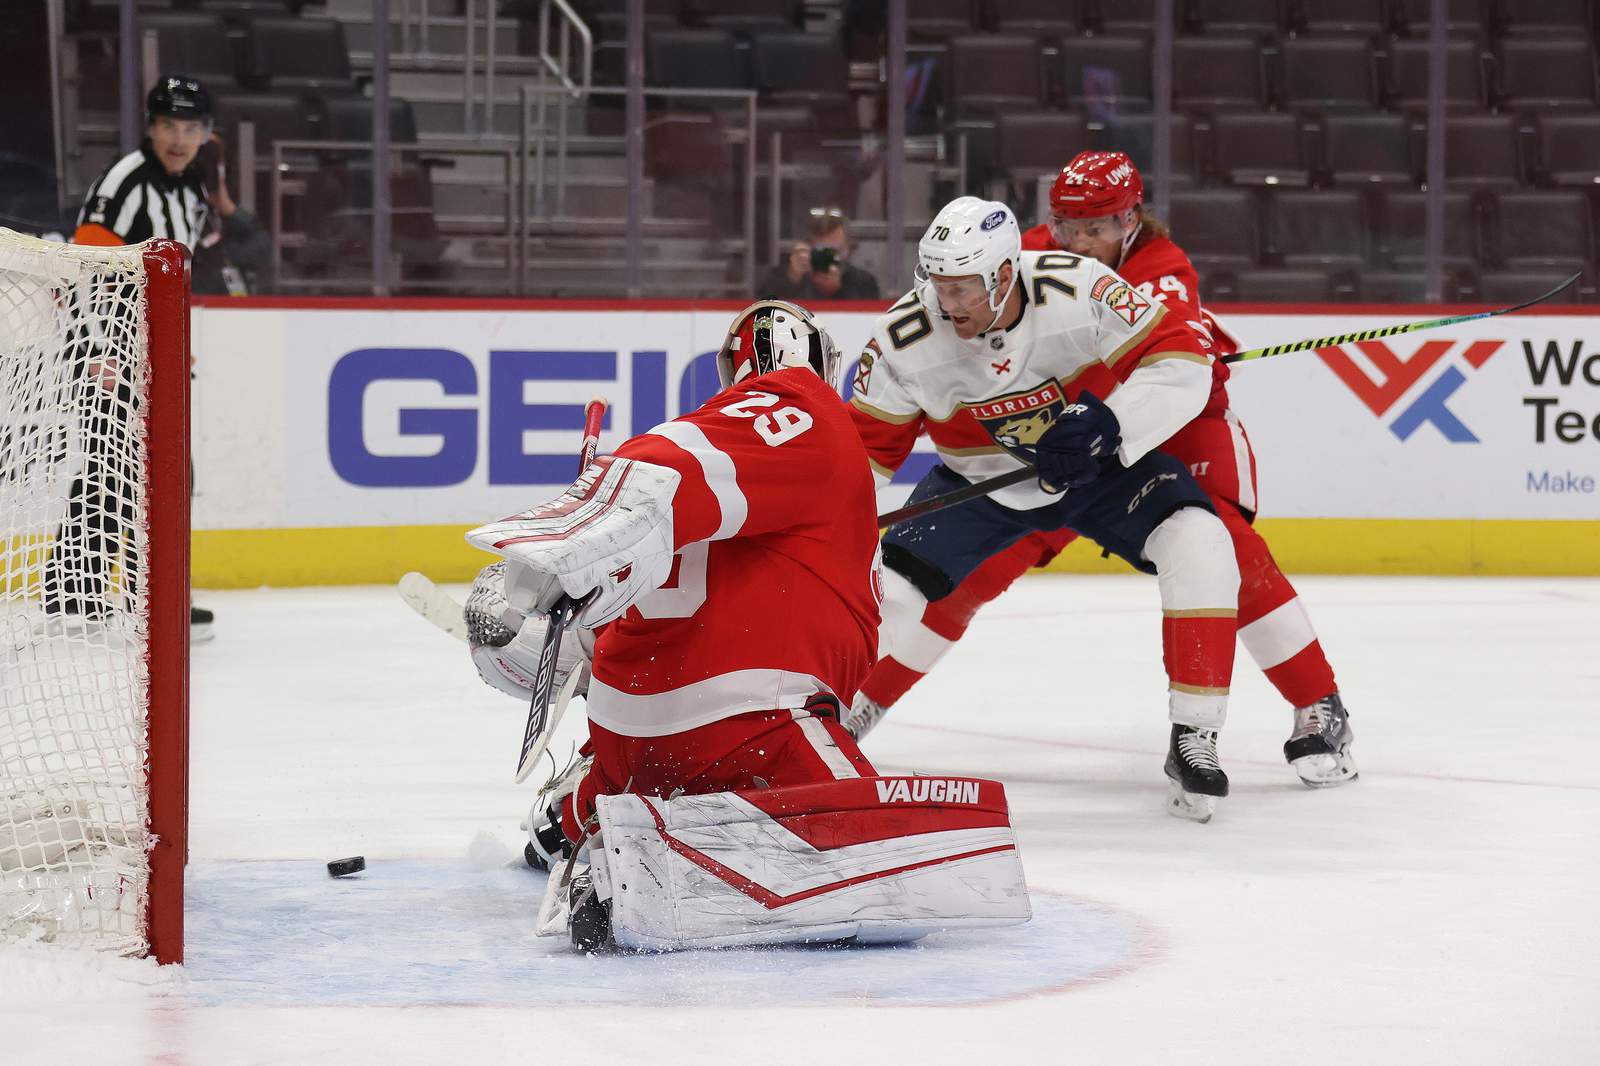 Patric Hornqvist scores twice, Panthers rout Red Wings 7-2